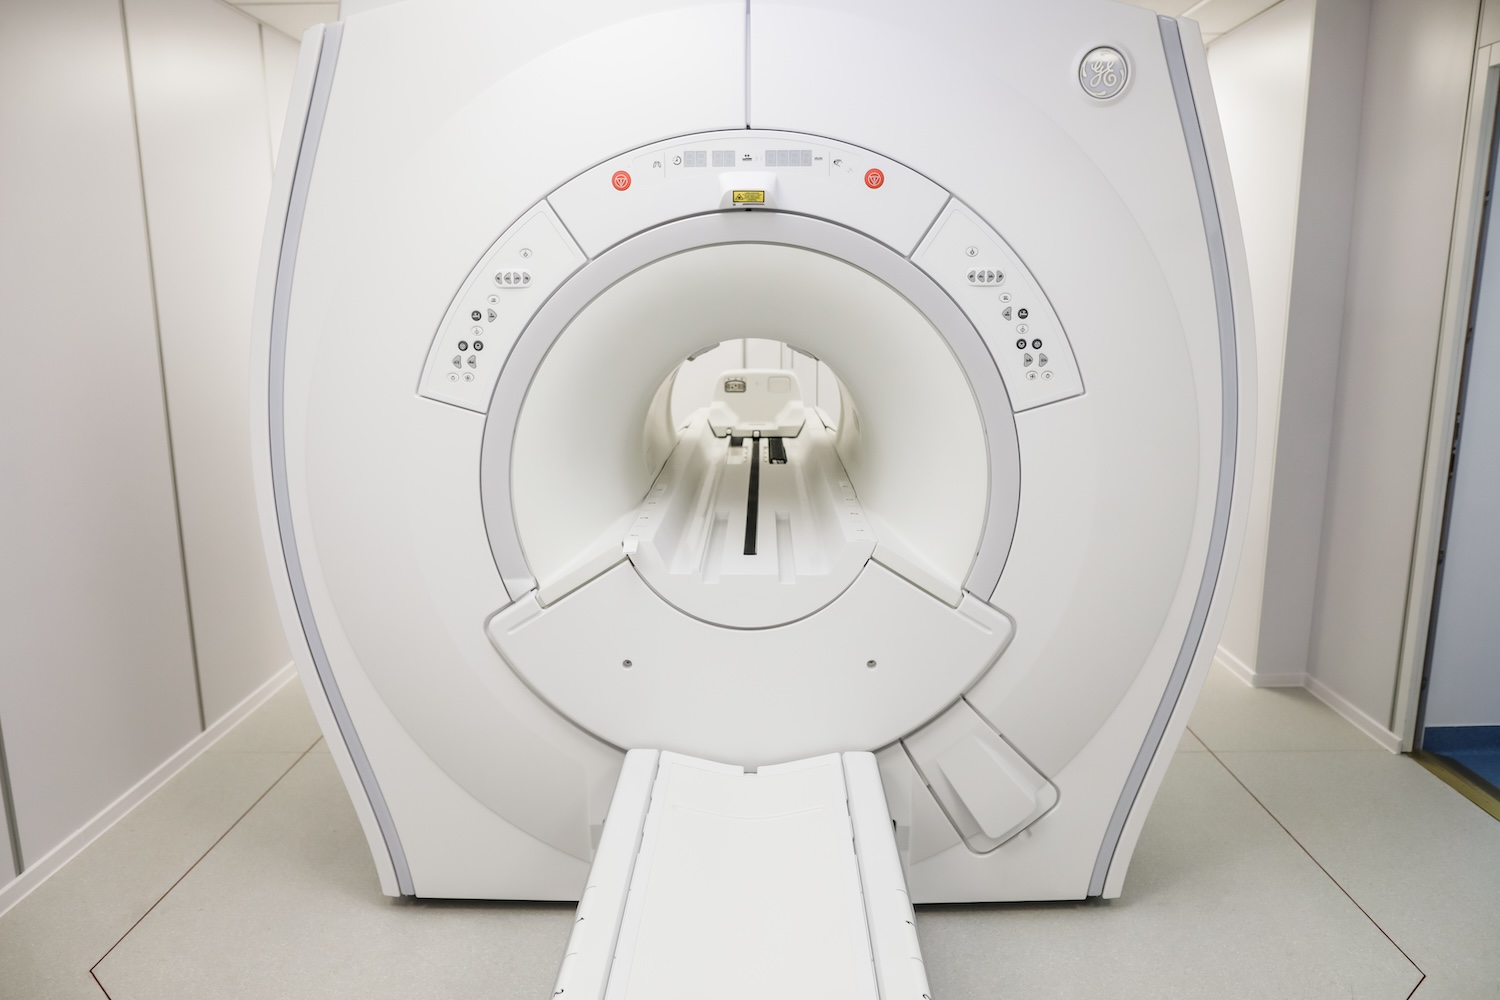 Get a full body private medical scan in Calgary and British Columbia